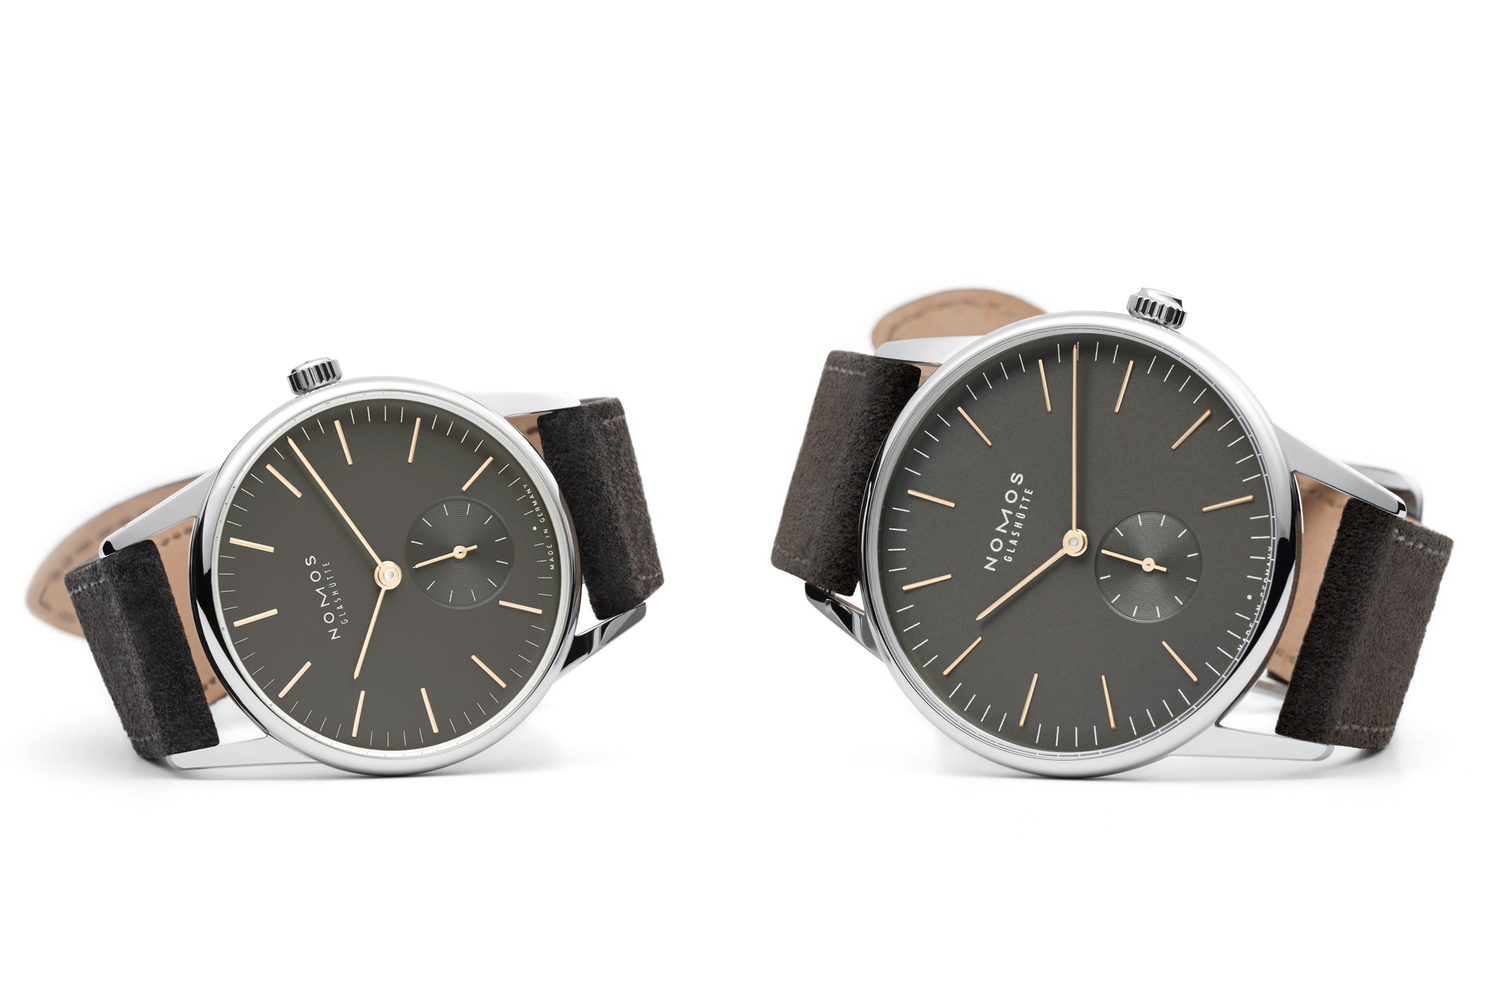 Introducing The Nomos Orion 1989, Celebrating The 25th Anniversary